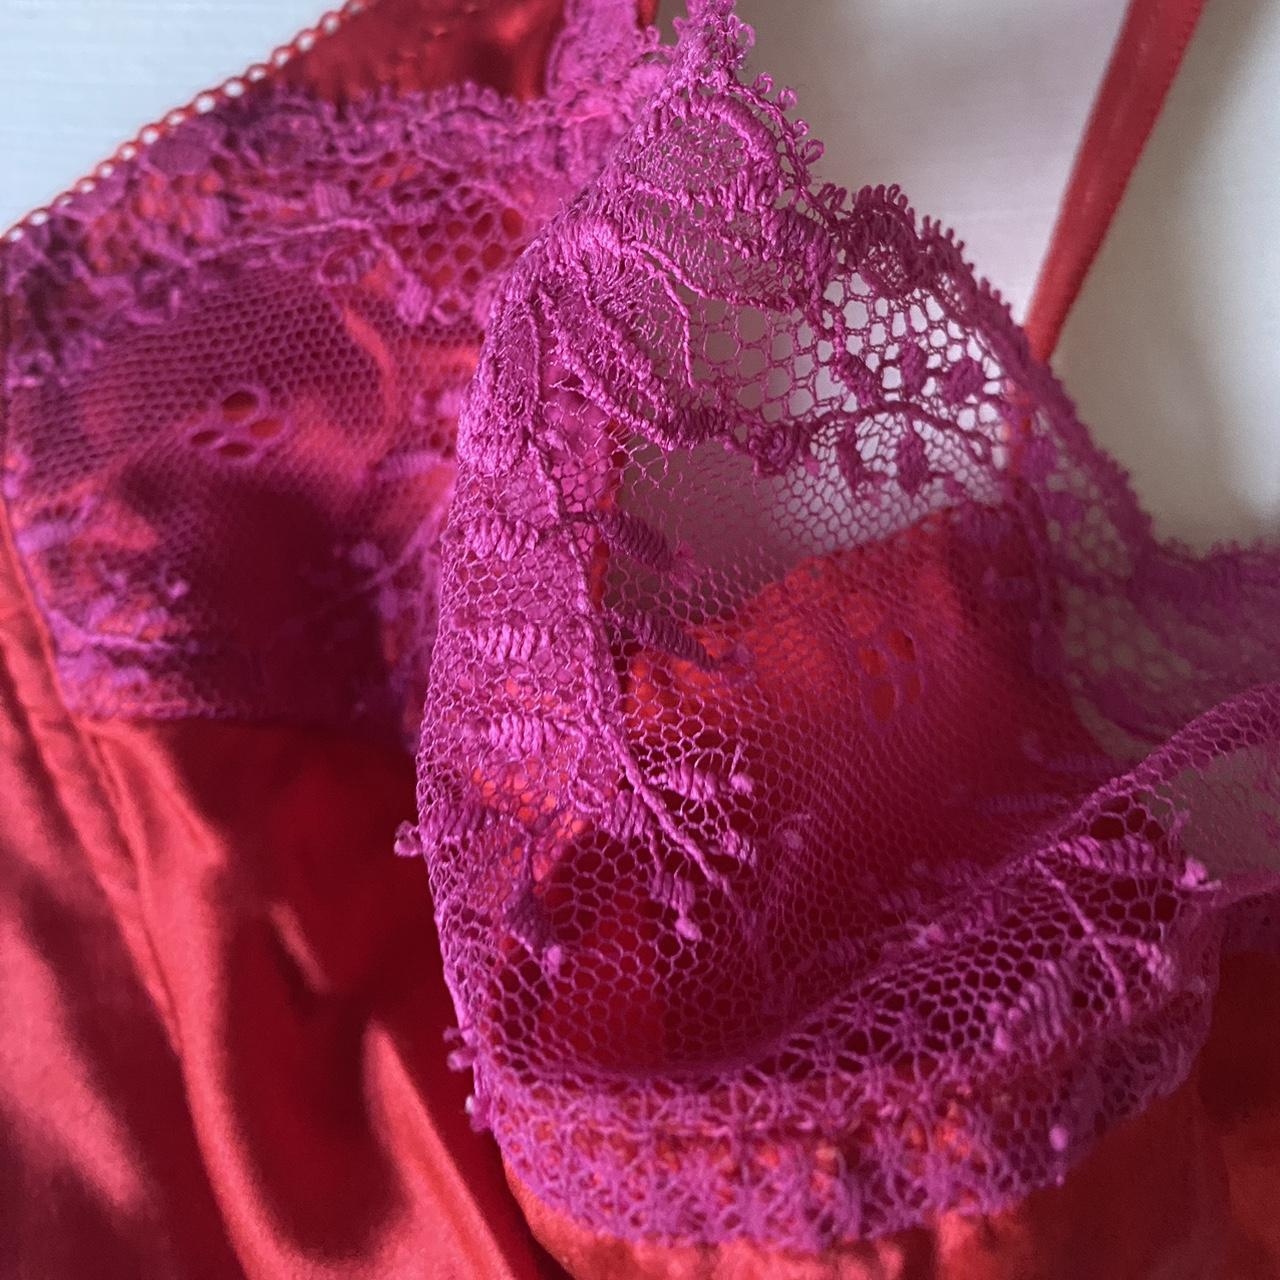 Splurge or Save? Agent Provocateur Vs. Ann Summers Red Satin & Pink Lace Bra